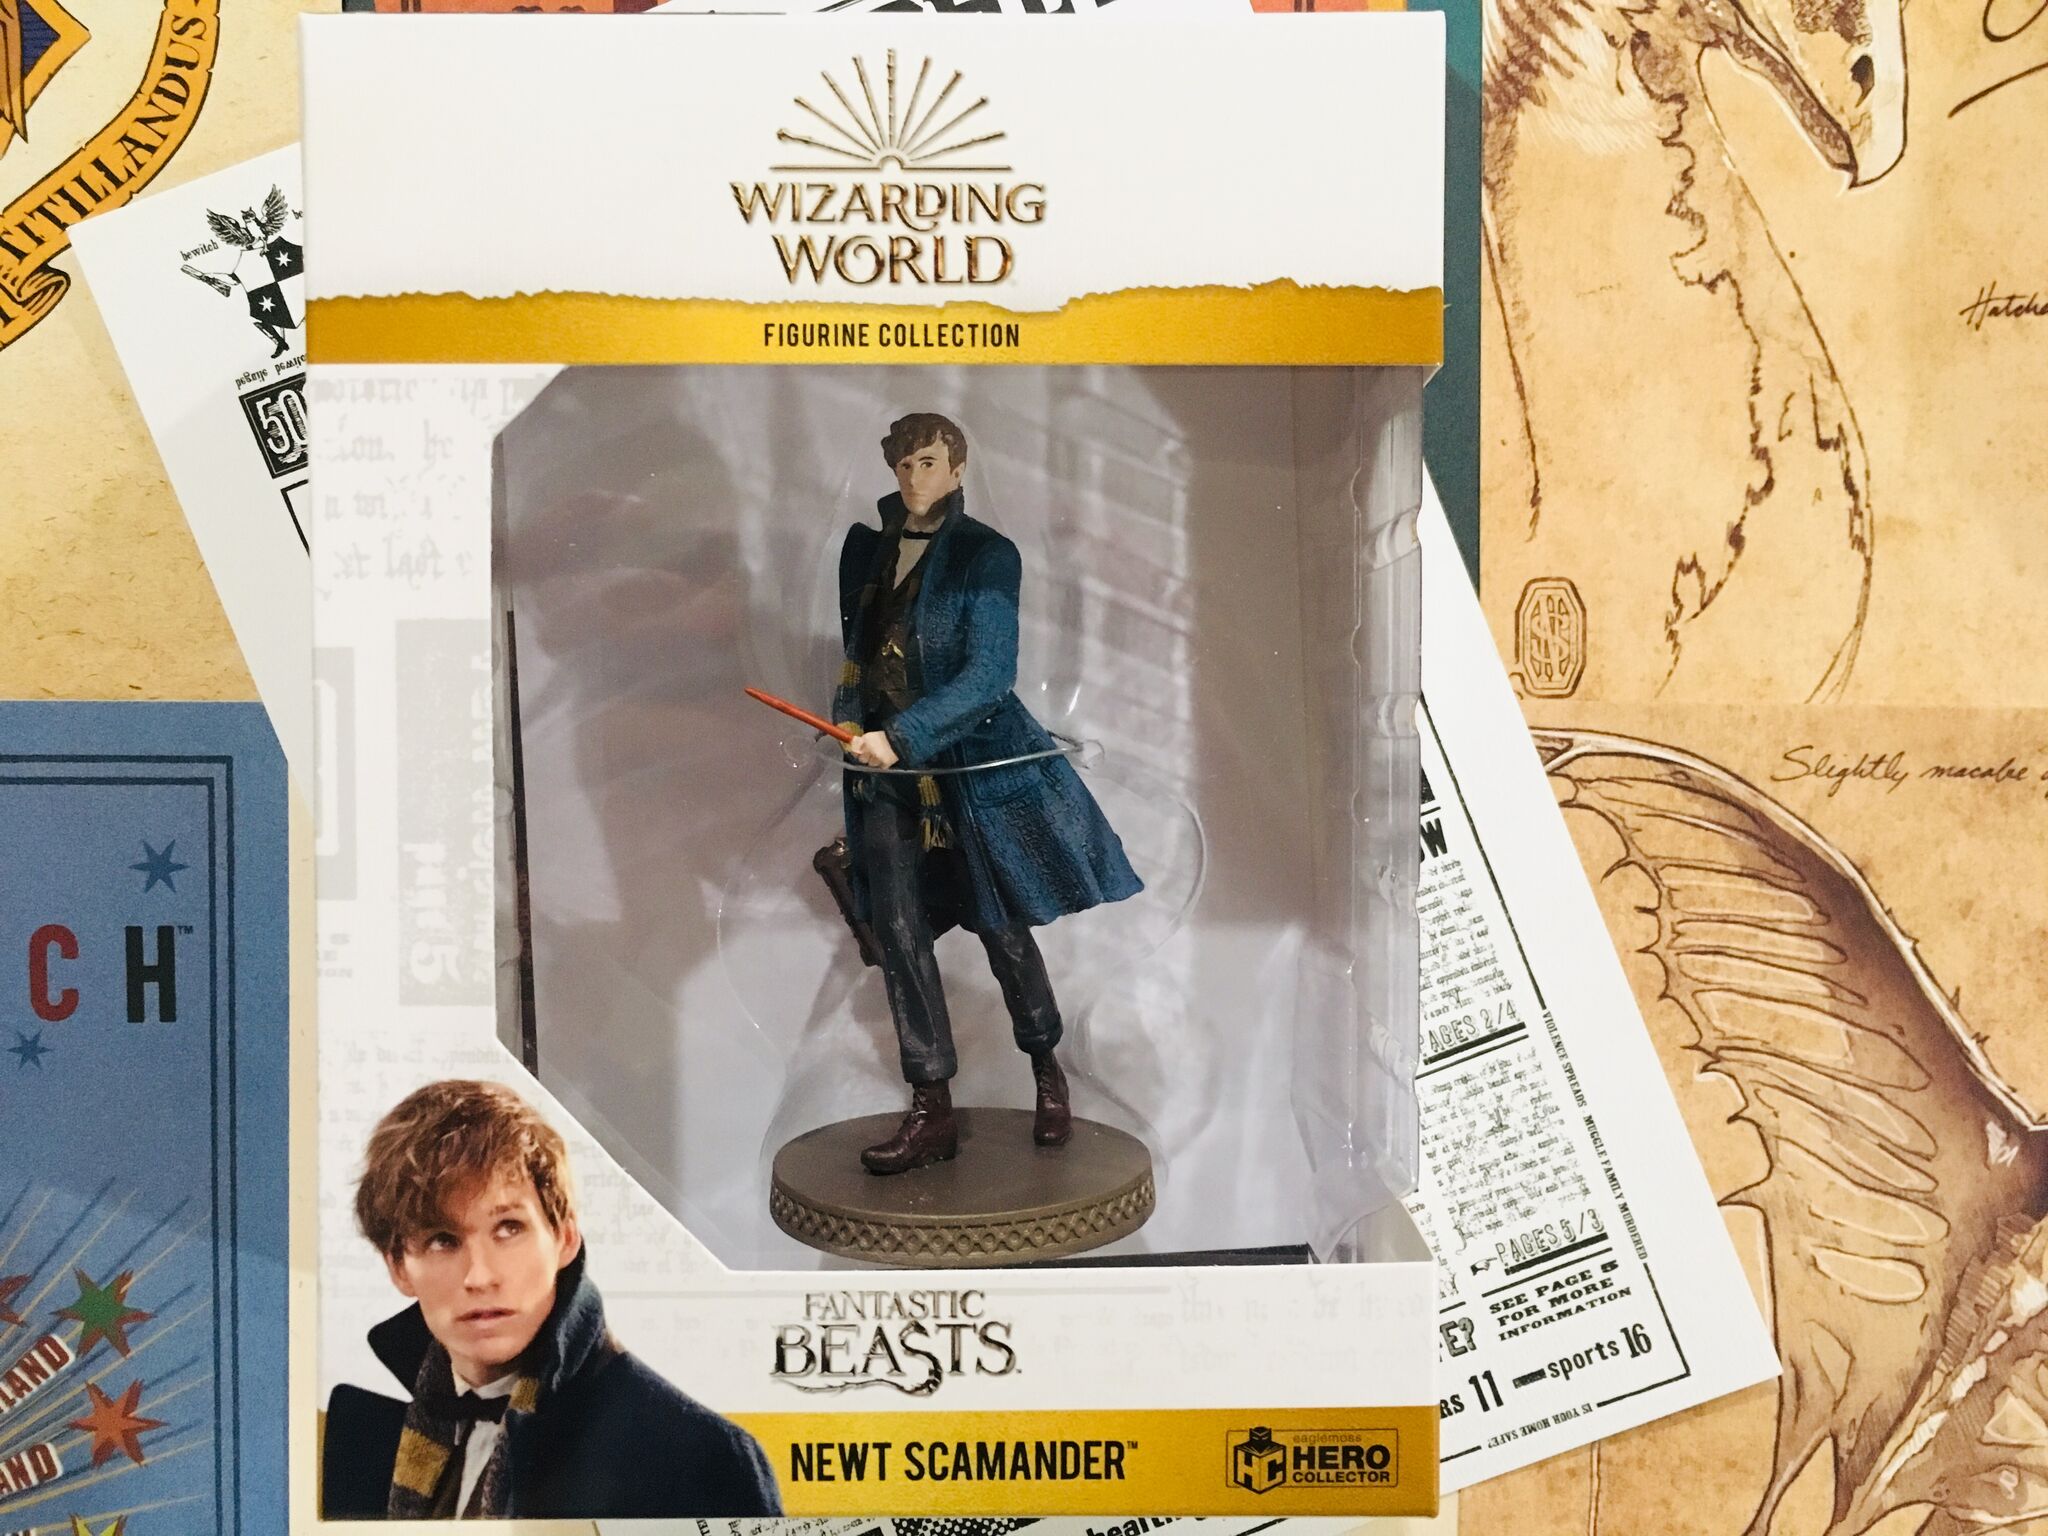 Newt is carefully packaged in a collectible box to ensure safety during delivery as well as for maximum display capabilities.